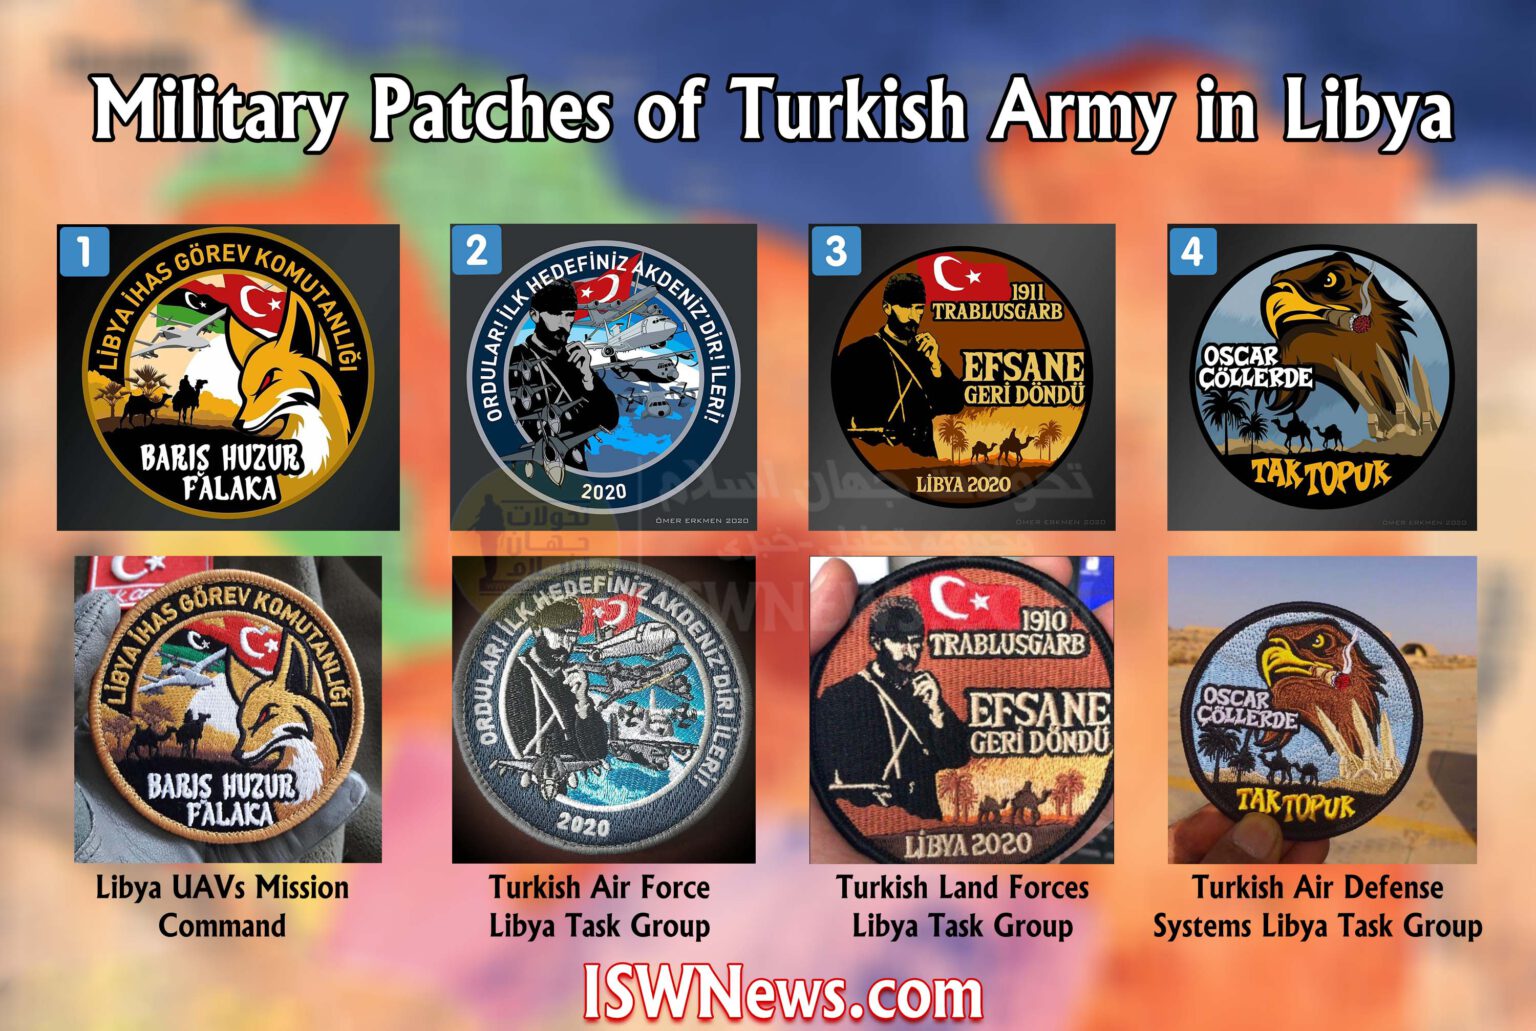 Military-Patches-of-Turkish-Army-in-Libya-1536x1031.jpg